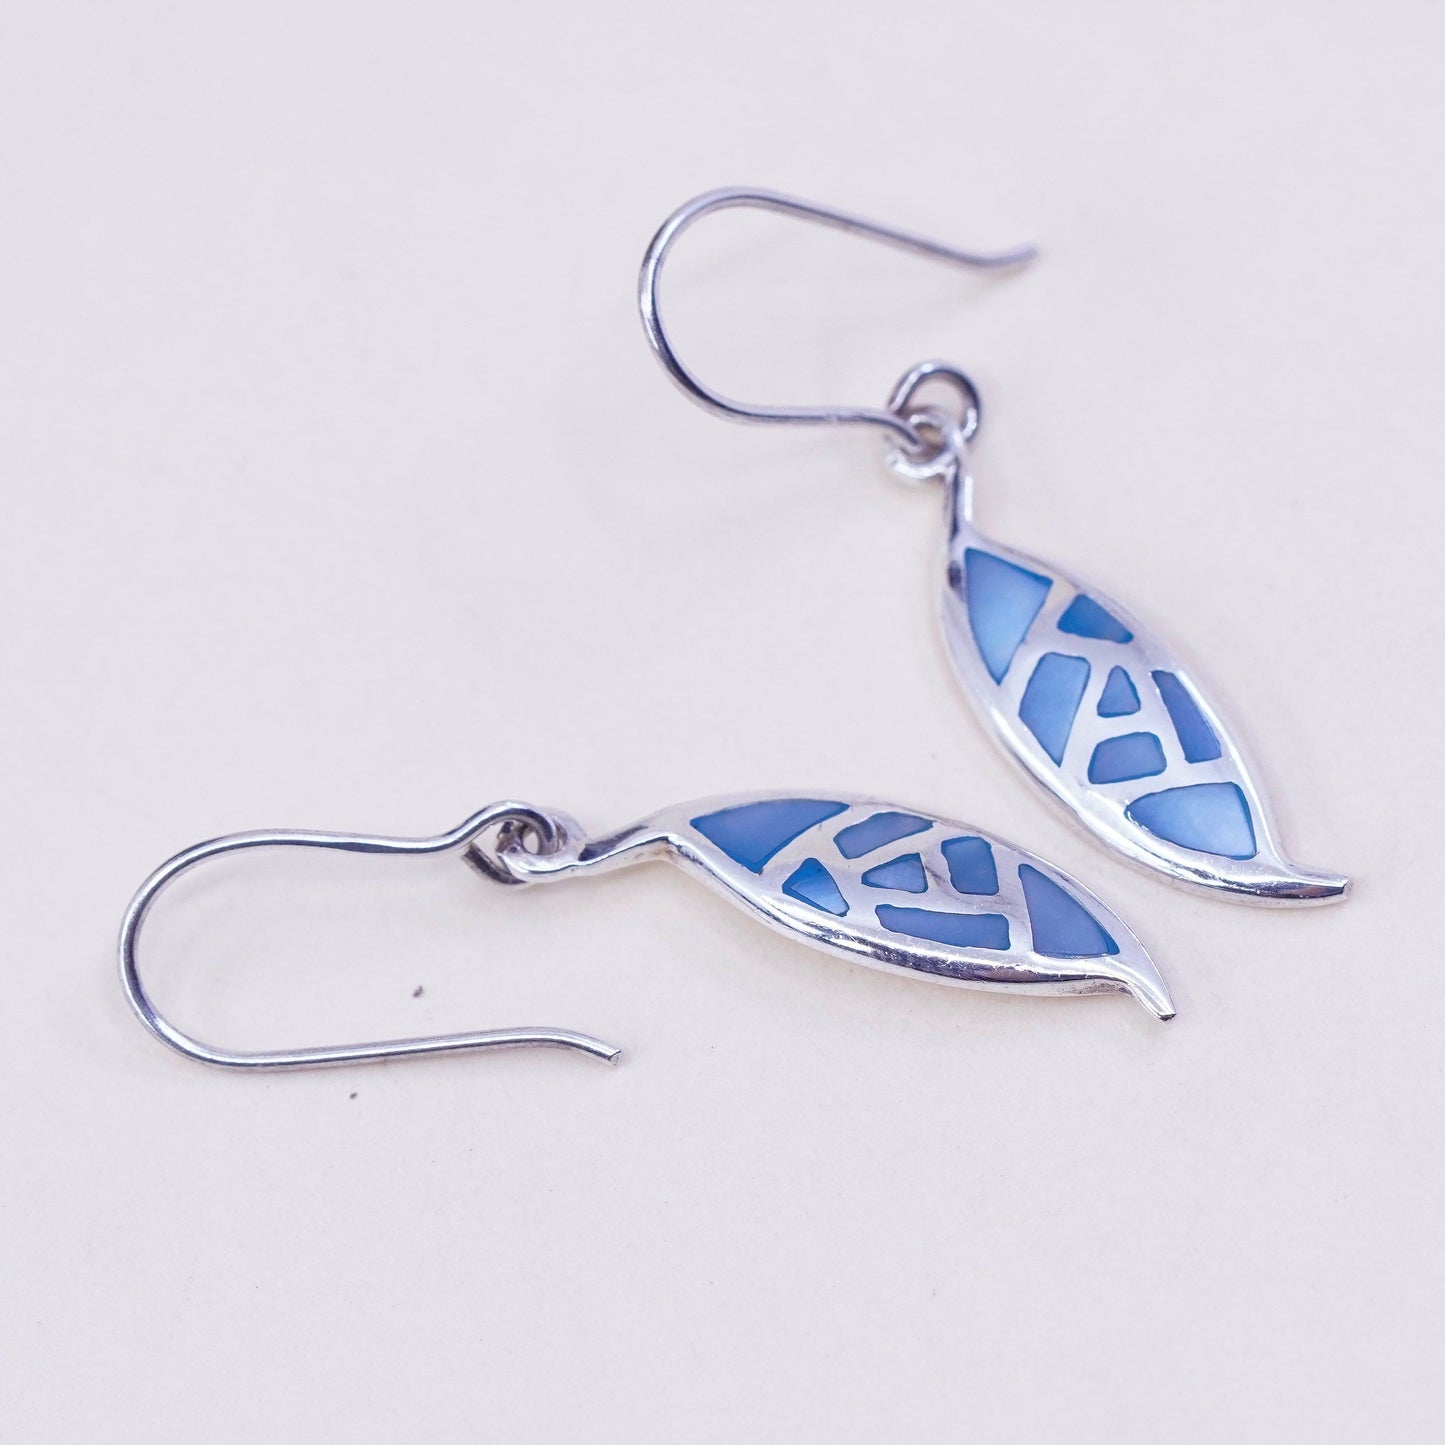 Vintage sterling 925 silver handmade earrings with blue mother of pearl drop, stamped 925